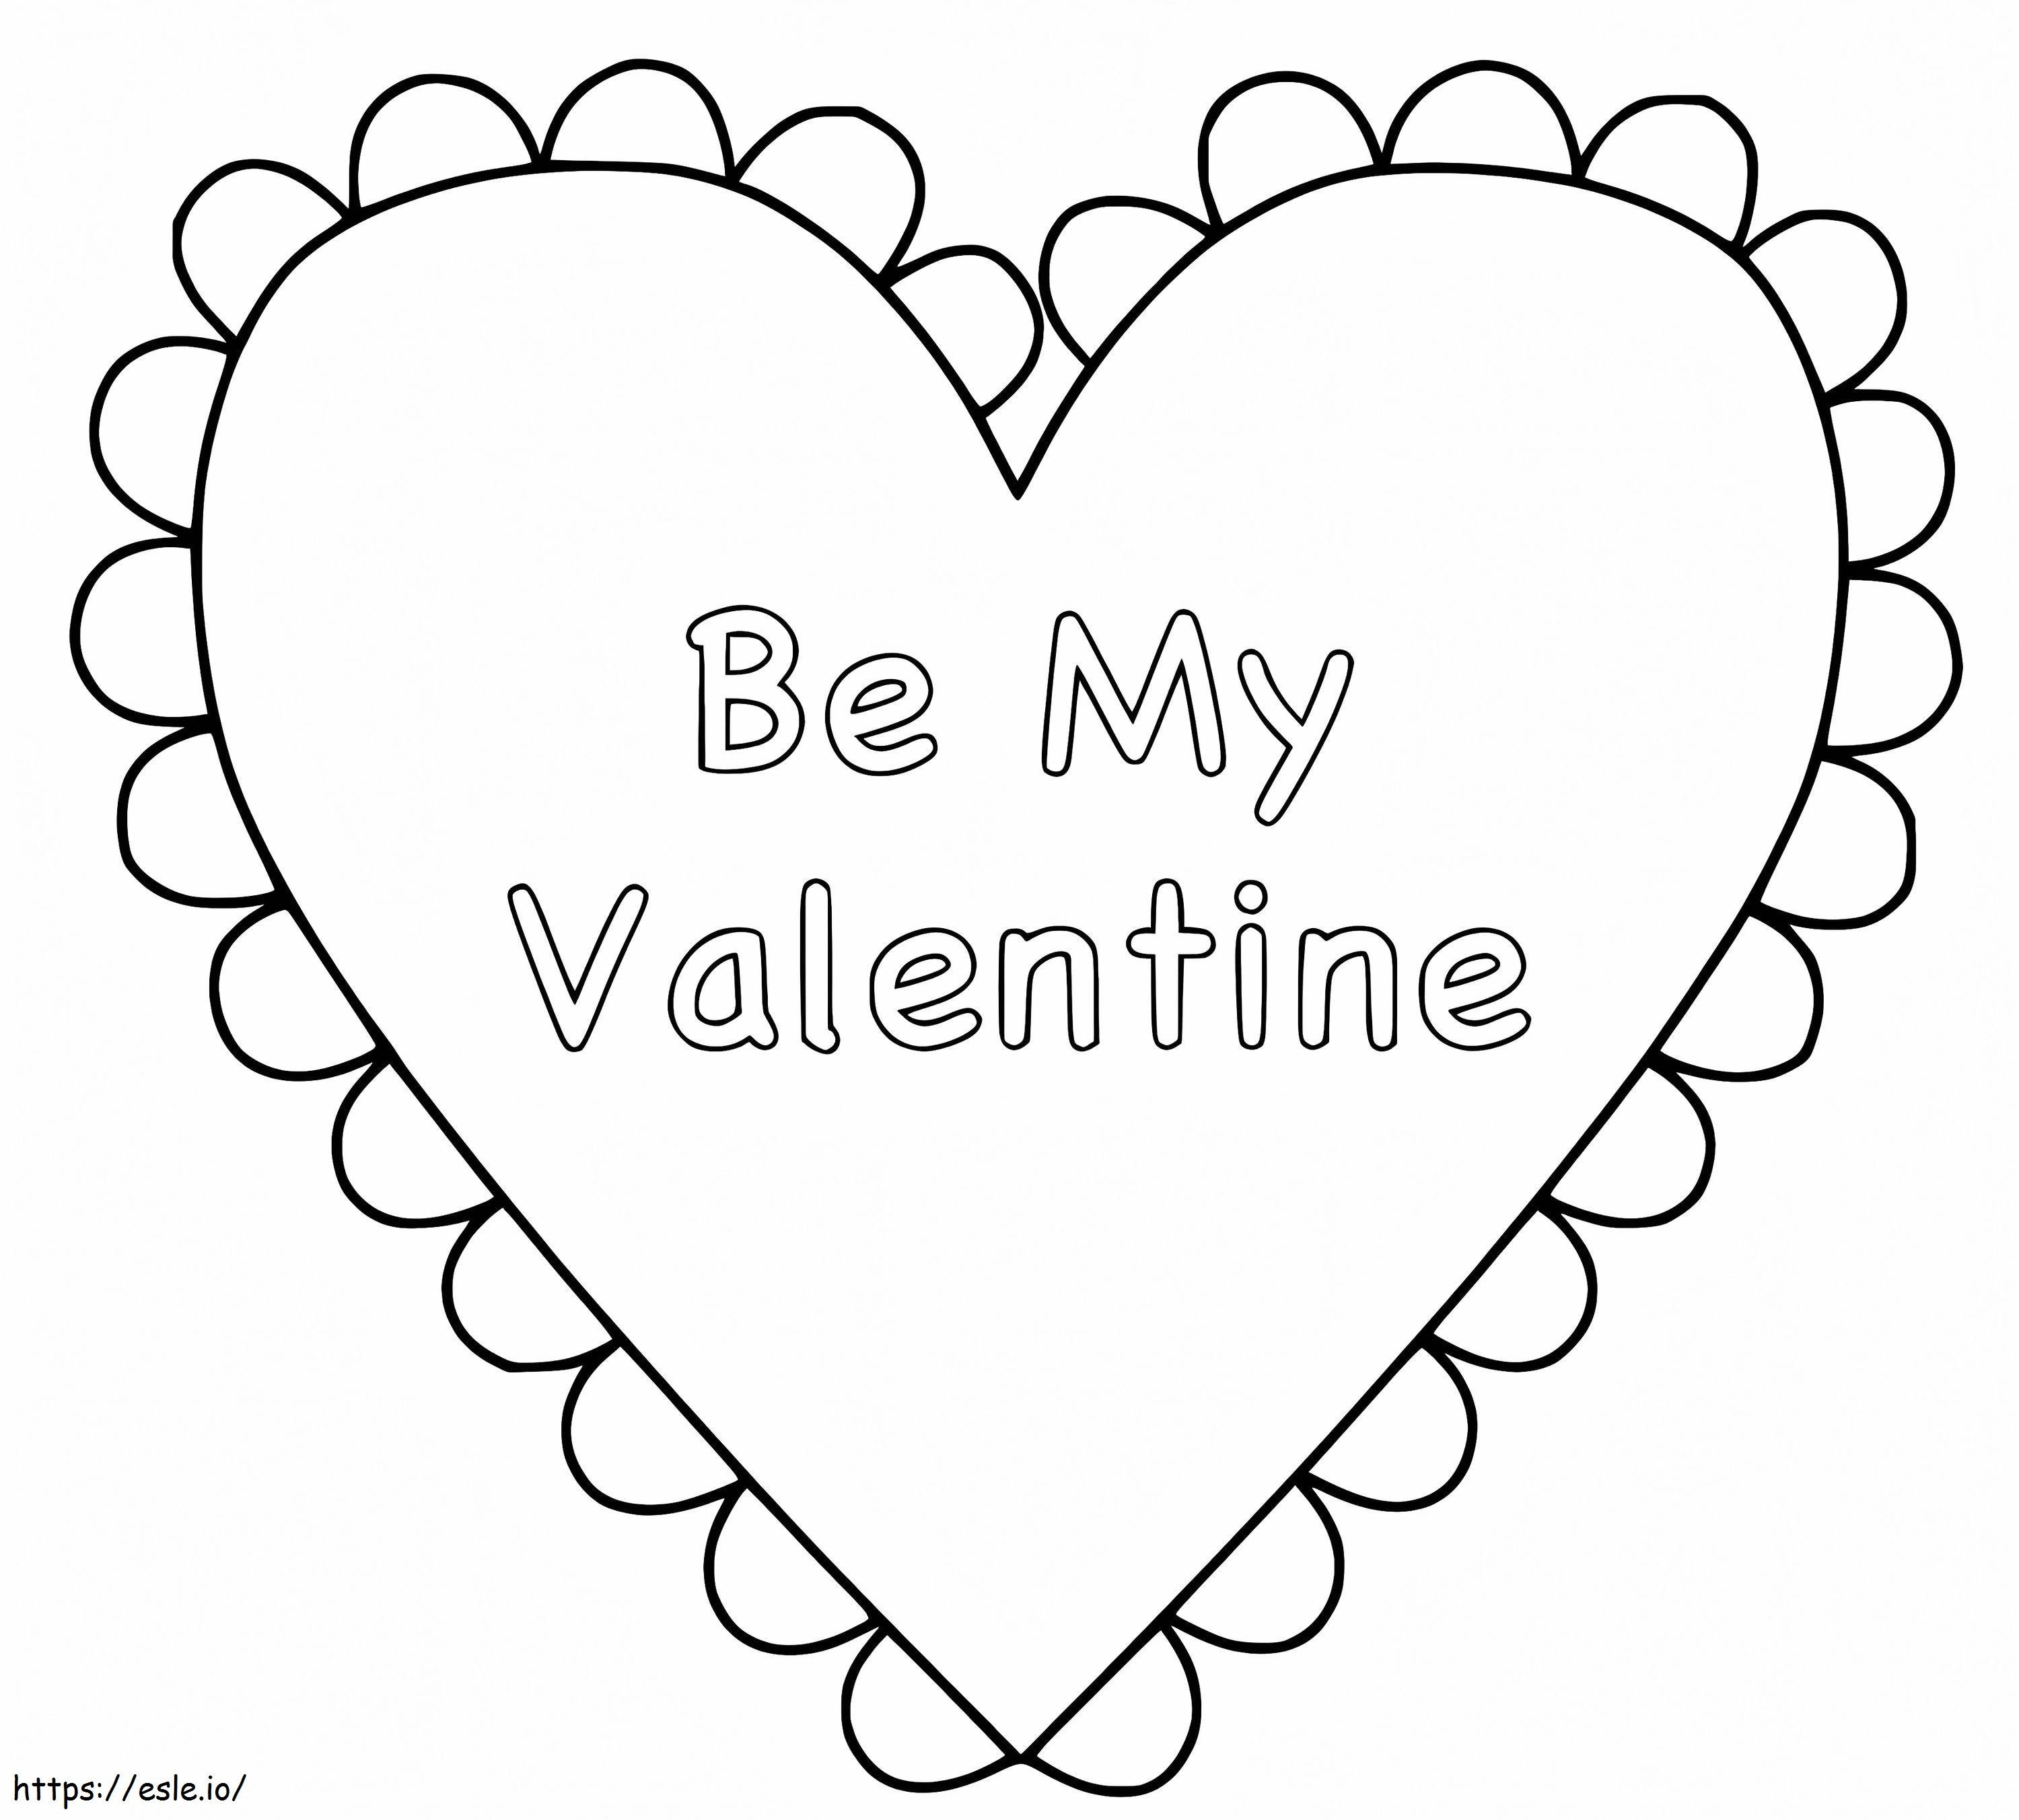 Be My Valentine Free Printable coloring page